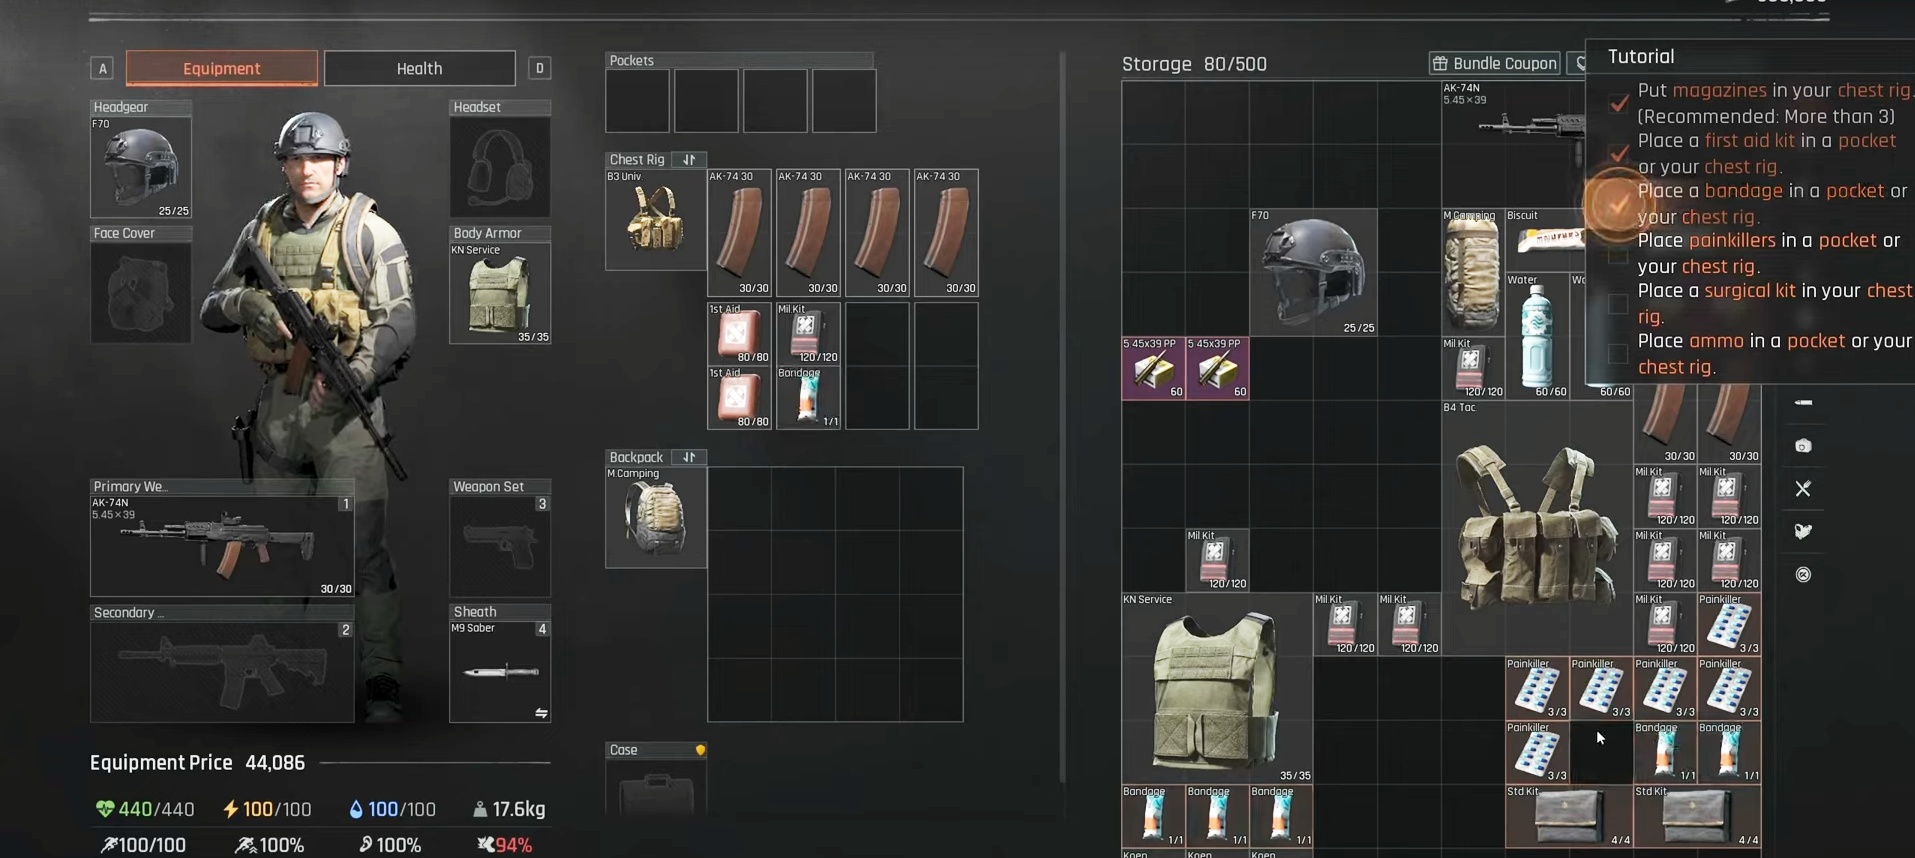 (Right in the picture: The game goes through the most important items with us using a checklist and shows us where we should place them for the raid)